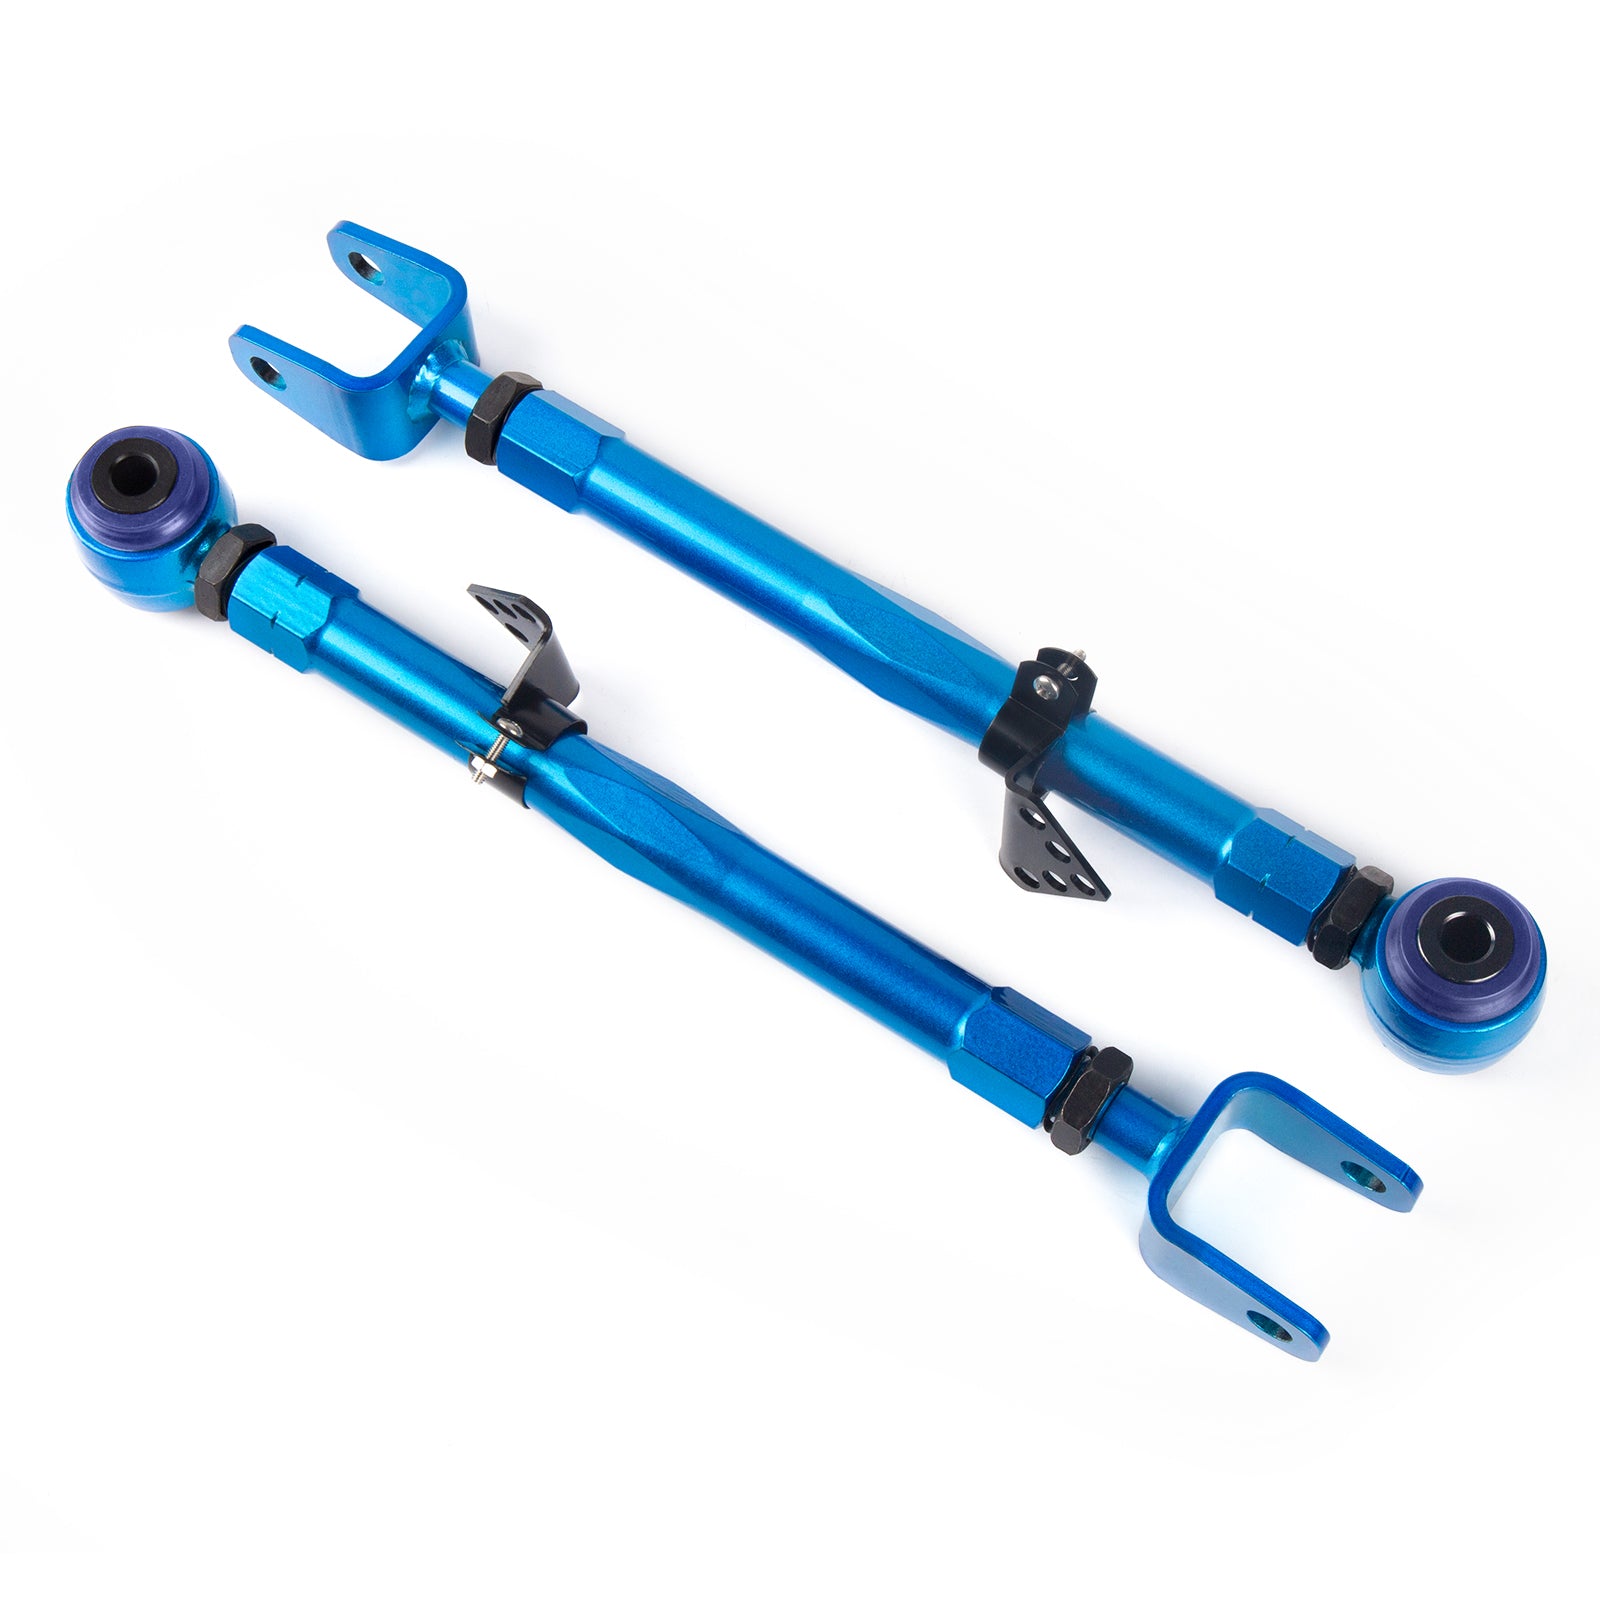 08-17 Accord & 09-14 TSX Rear adjustable camber arms set xccscss.